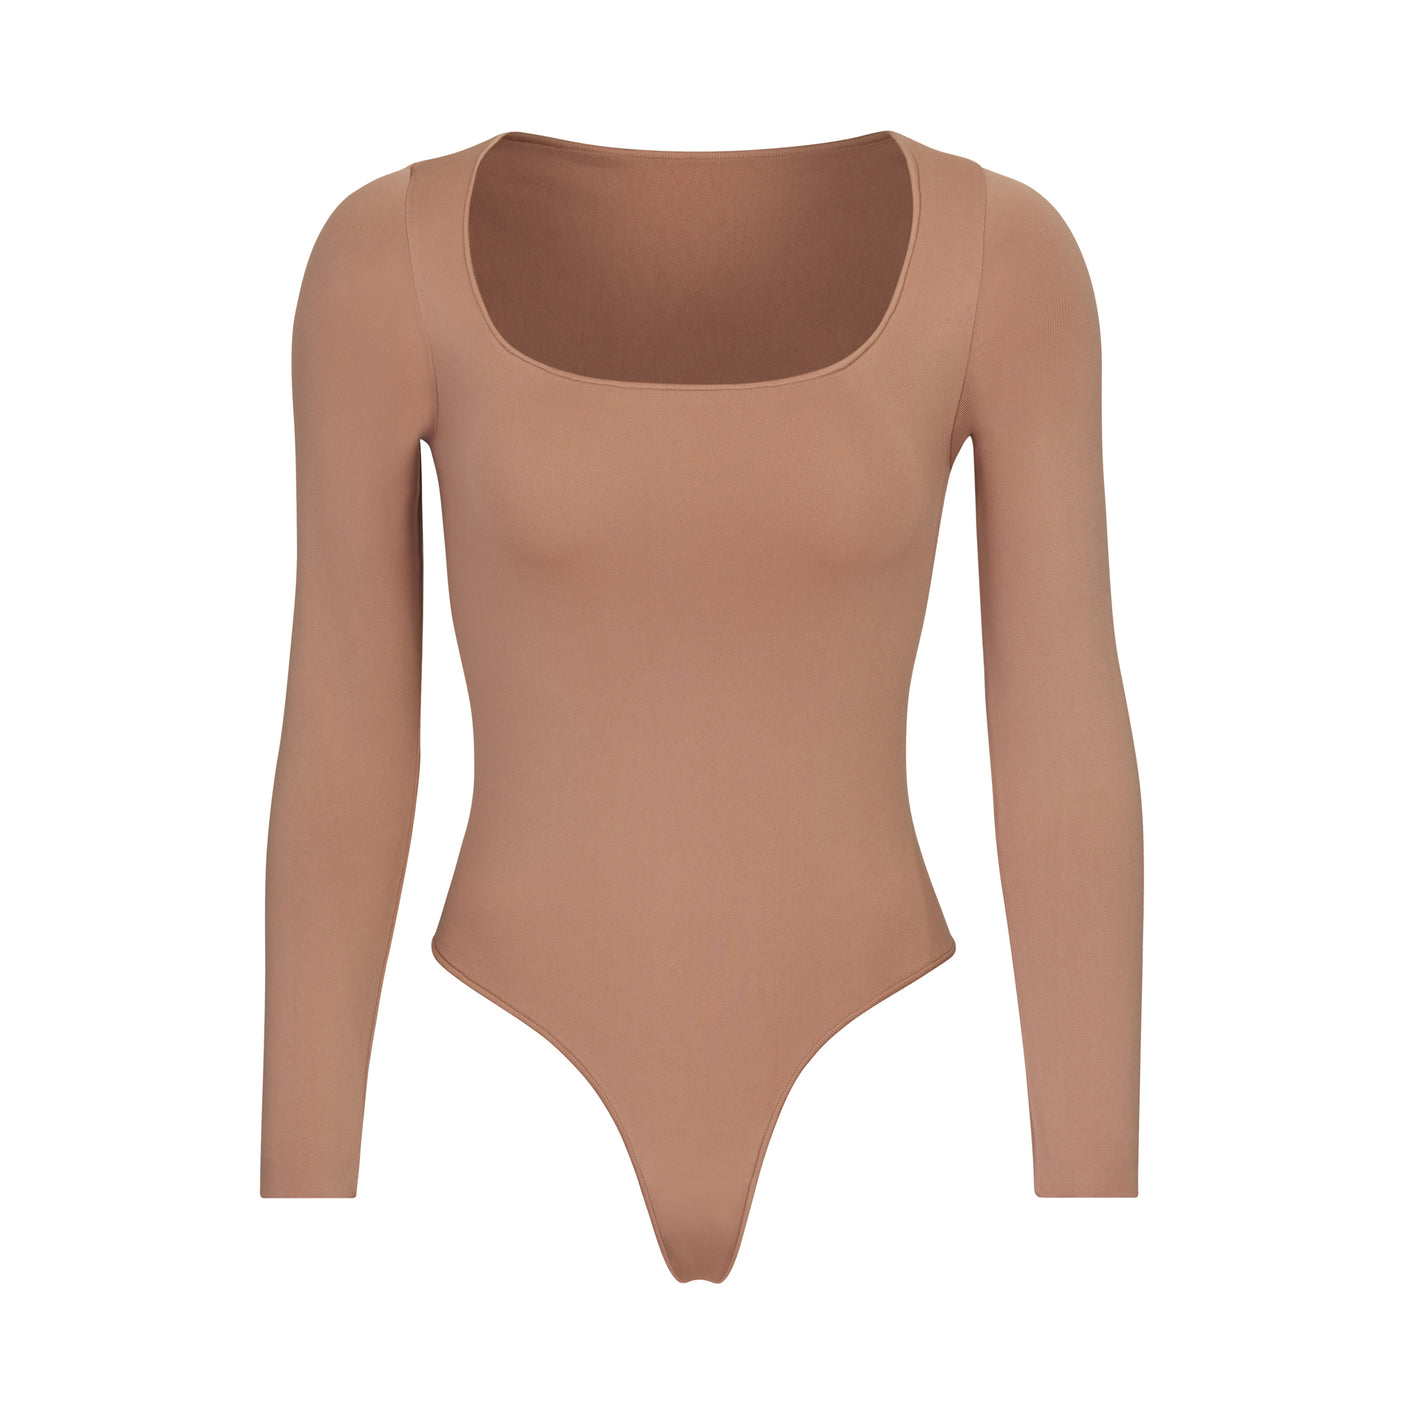 SKIMS - Now Available: SKIMS Essential Bodysuits in 2 new crisp colors made  for winter. Shop our new Arctic and Marble colors in sizes XXS - 5X